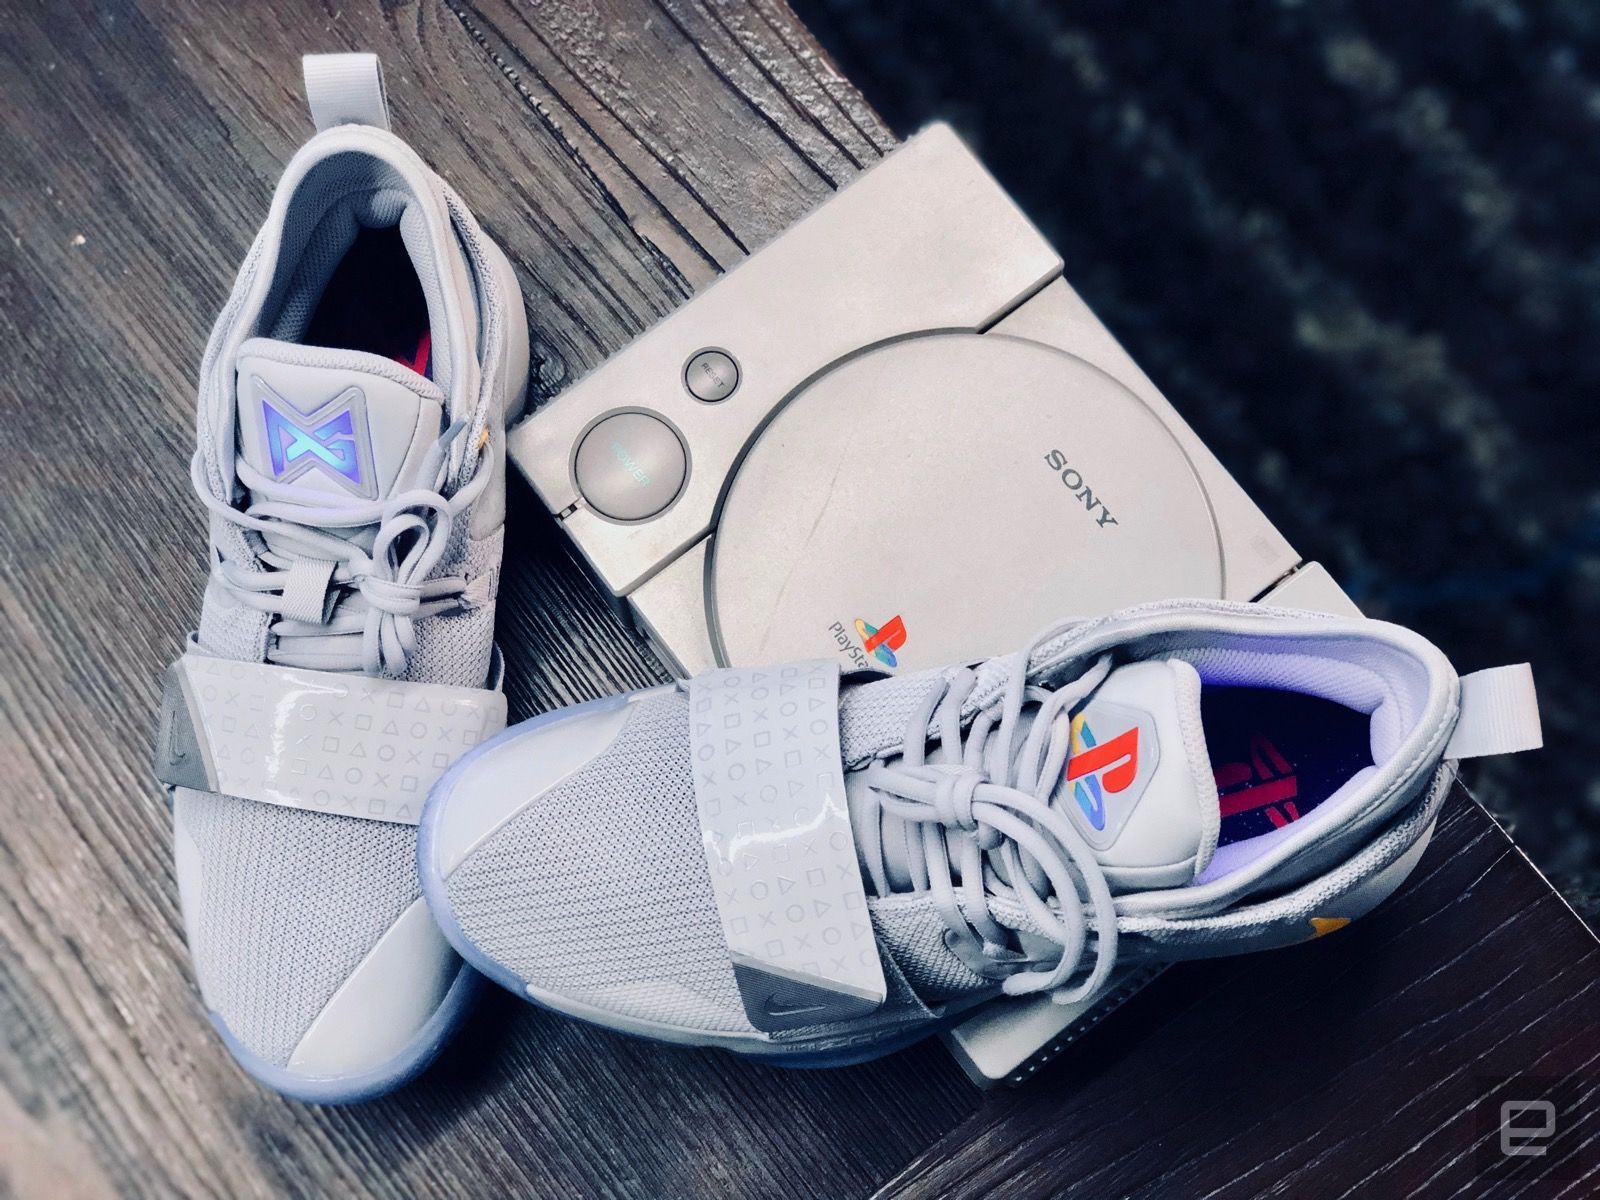 Nike's new PlayStation sneakers pay homage to Sony's classic